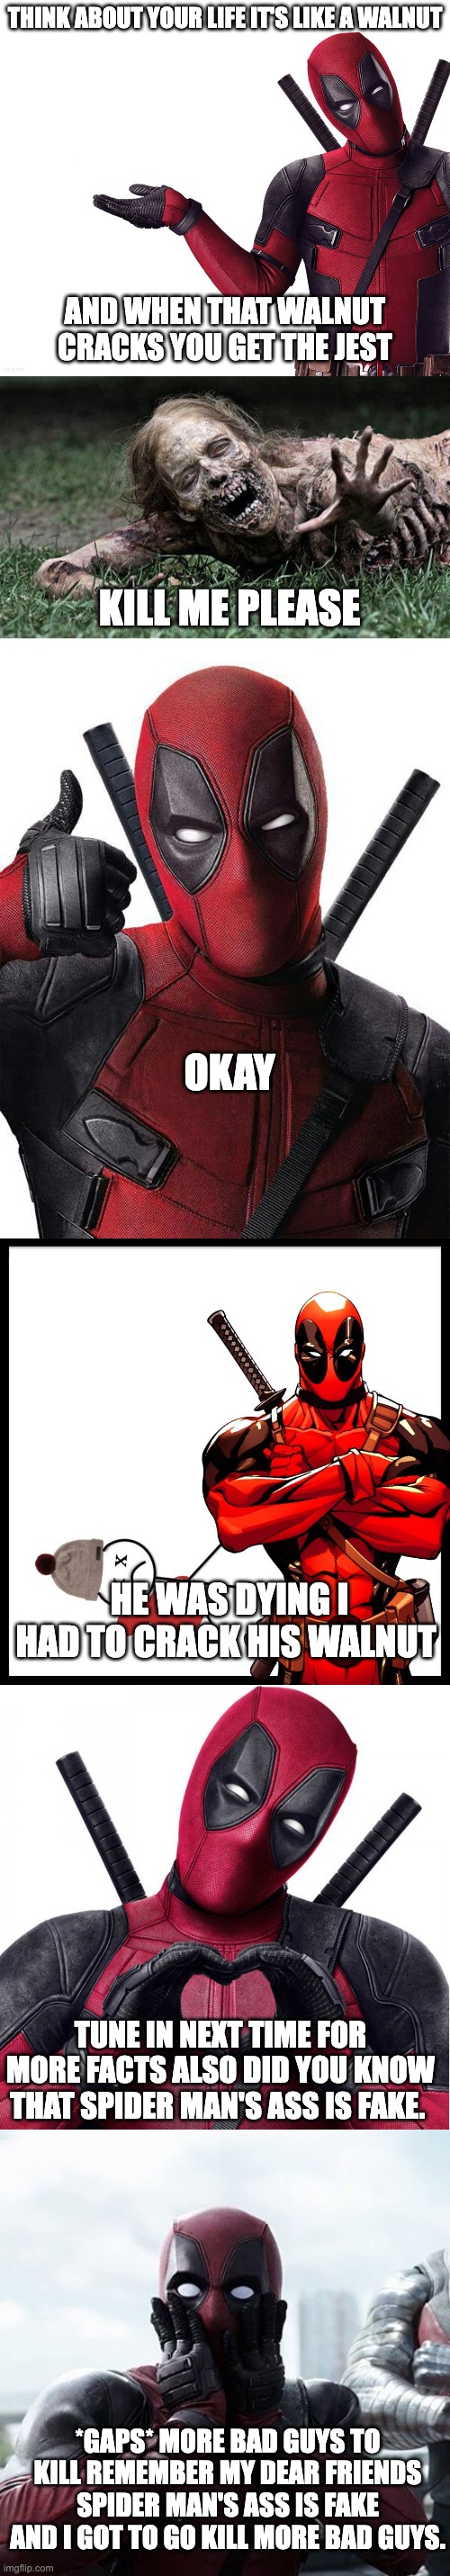 A horrible fact with Deadpool (extended) | THINK ABOUT YOUR LIFE IT'S LIKE A WALNUT; AND WHEN THAT WALNUT CRACKS YOU GET THE JEST; KILL ME PLEASE; OKAY; HE WAS DYING I HAD TO CRACK HIS WALNUT; TUNE IN NEXT TIME FOR MORE FACTS ALSO DID YOU KNOW THAT SPIDER MAN'S ASS IS FAKE. *GAPS* MORE BAD GUYS TO KILL REMEMBER MY DEAR FRIENDS SPIDER MAN'S ASS IS FAKE AND I GOT TO GO KILL MORE BAD GUYS. | image tagged in deadpool head tilt squint funny look question,walking dead zombie,deadpool thumbs up,deadpool killed bill,deadpool heart,memes | made w/ Imgflip meme maker